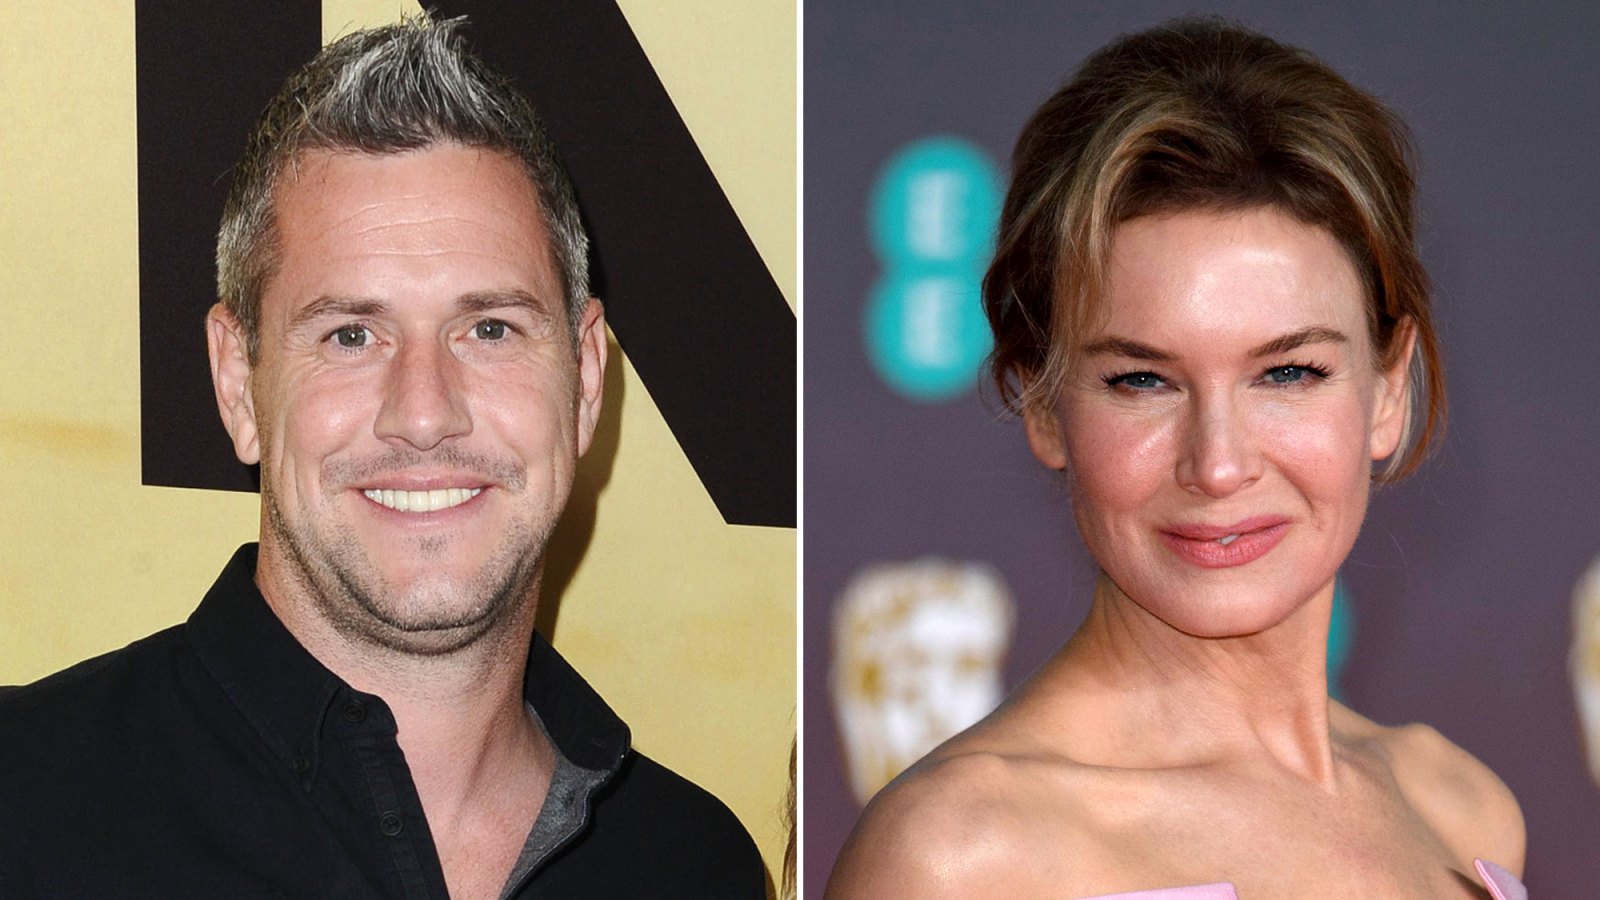 Ant Anstead Describes 'Magical' Introduction to Renee Zellweger, Gives Coparenting Update With Ex Christina Haack